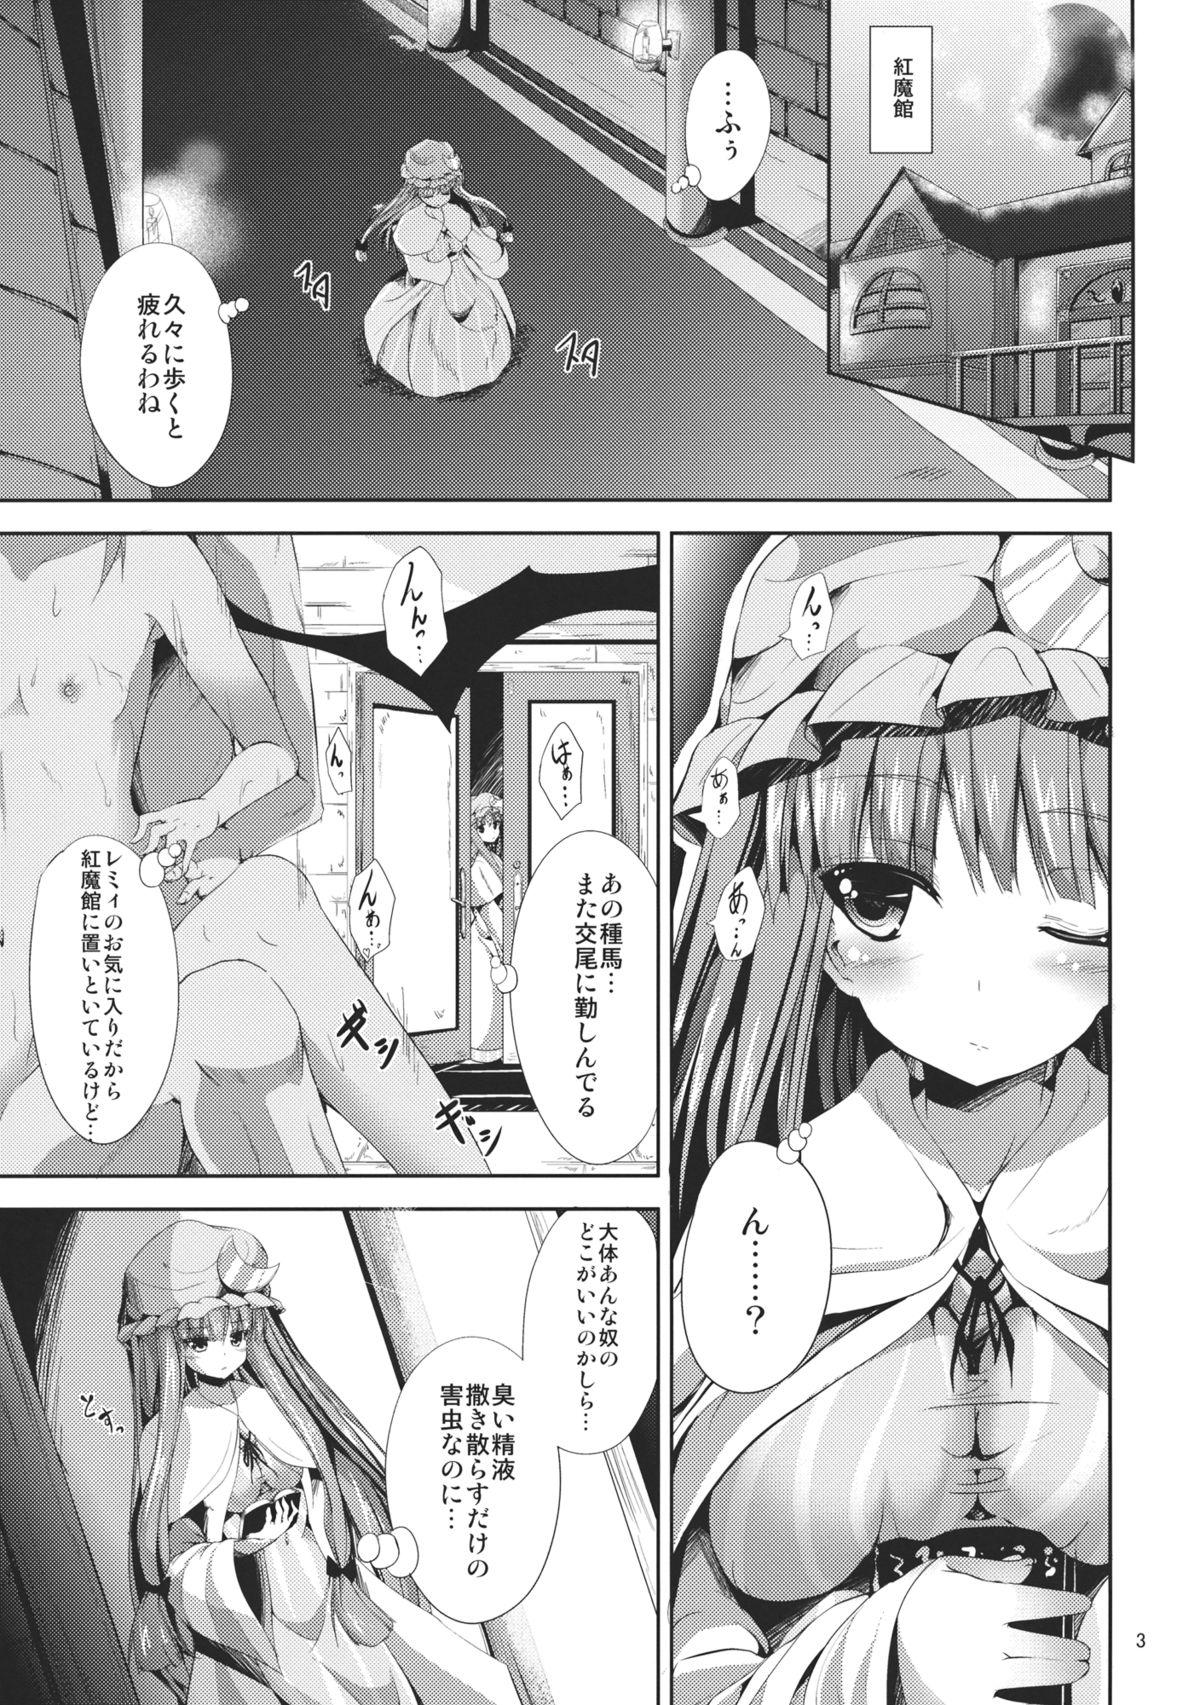 Ass Licking Sweet nothingS - Touhou project Naked Sluts - Page 3